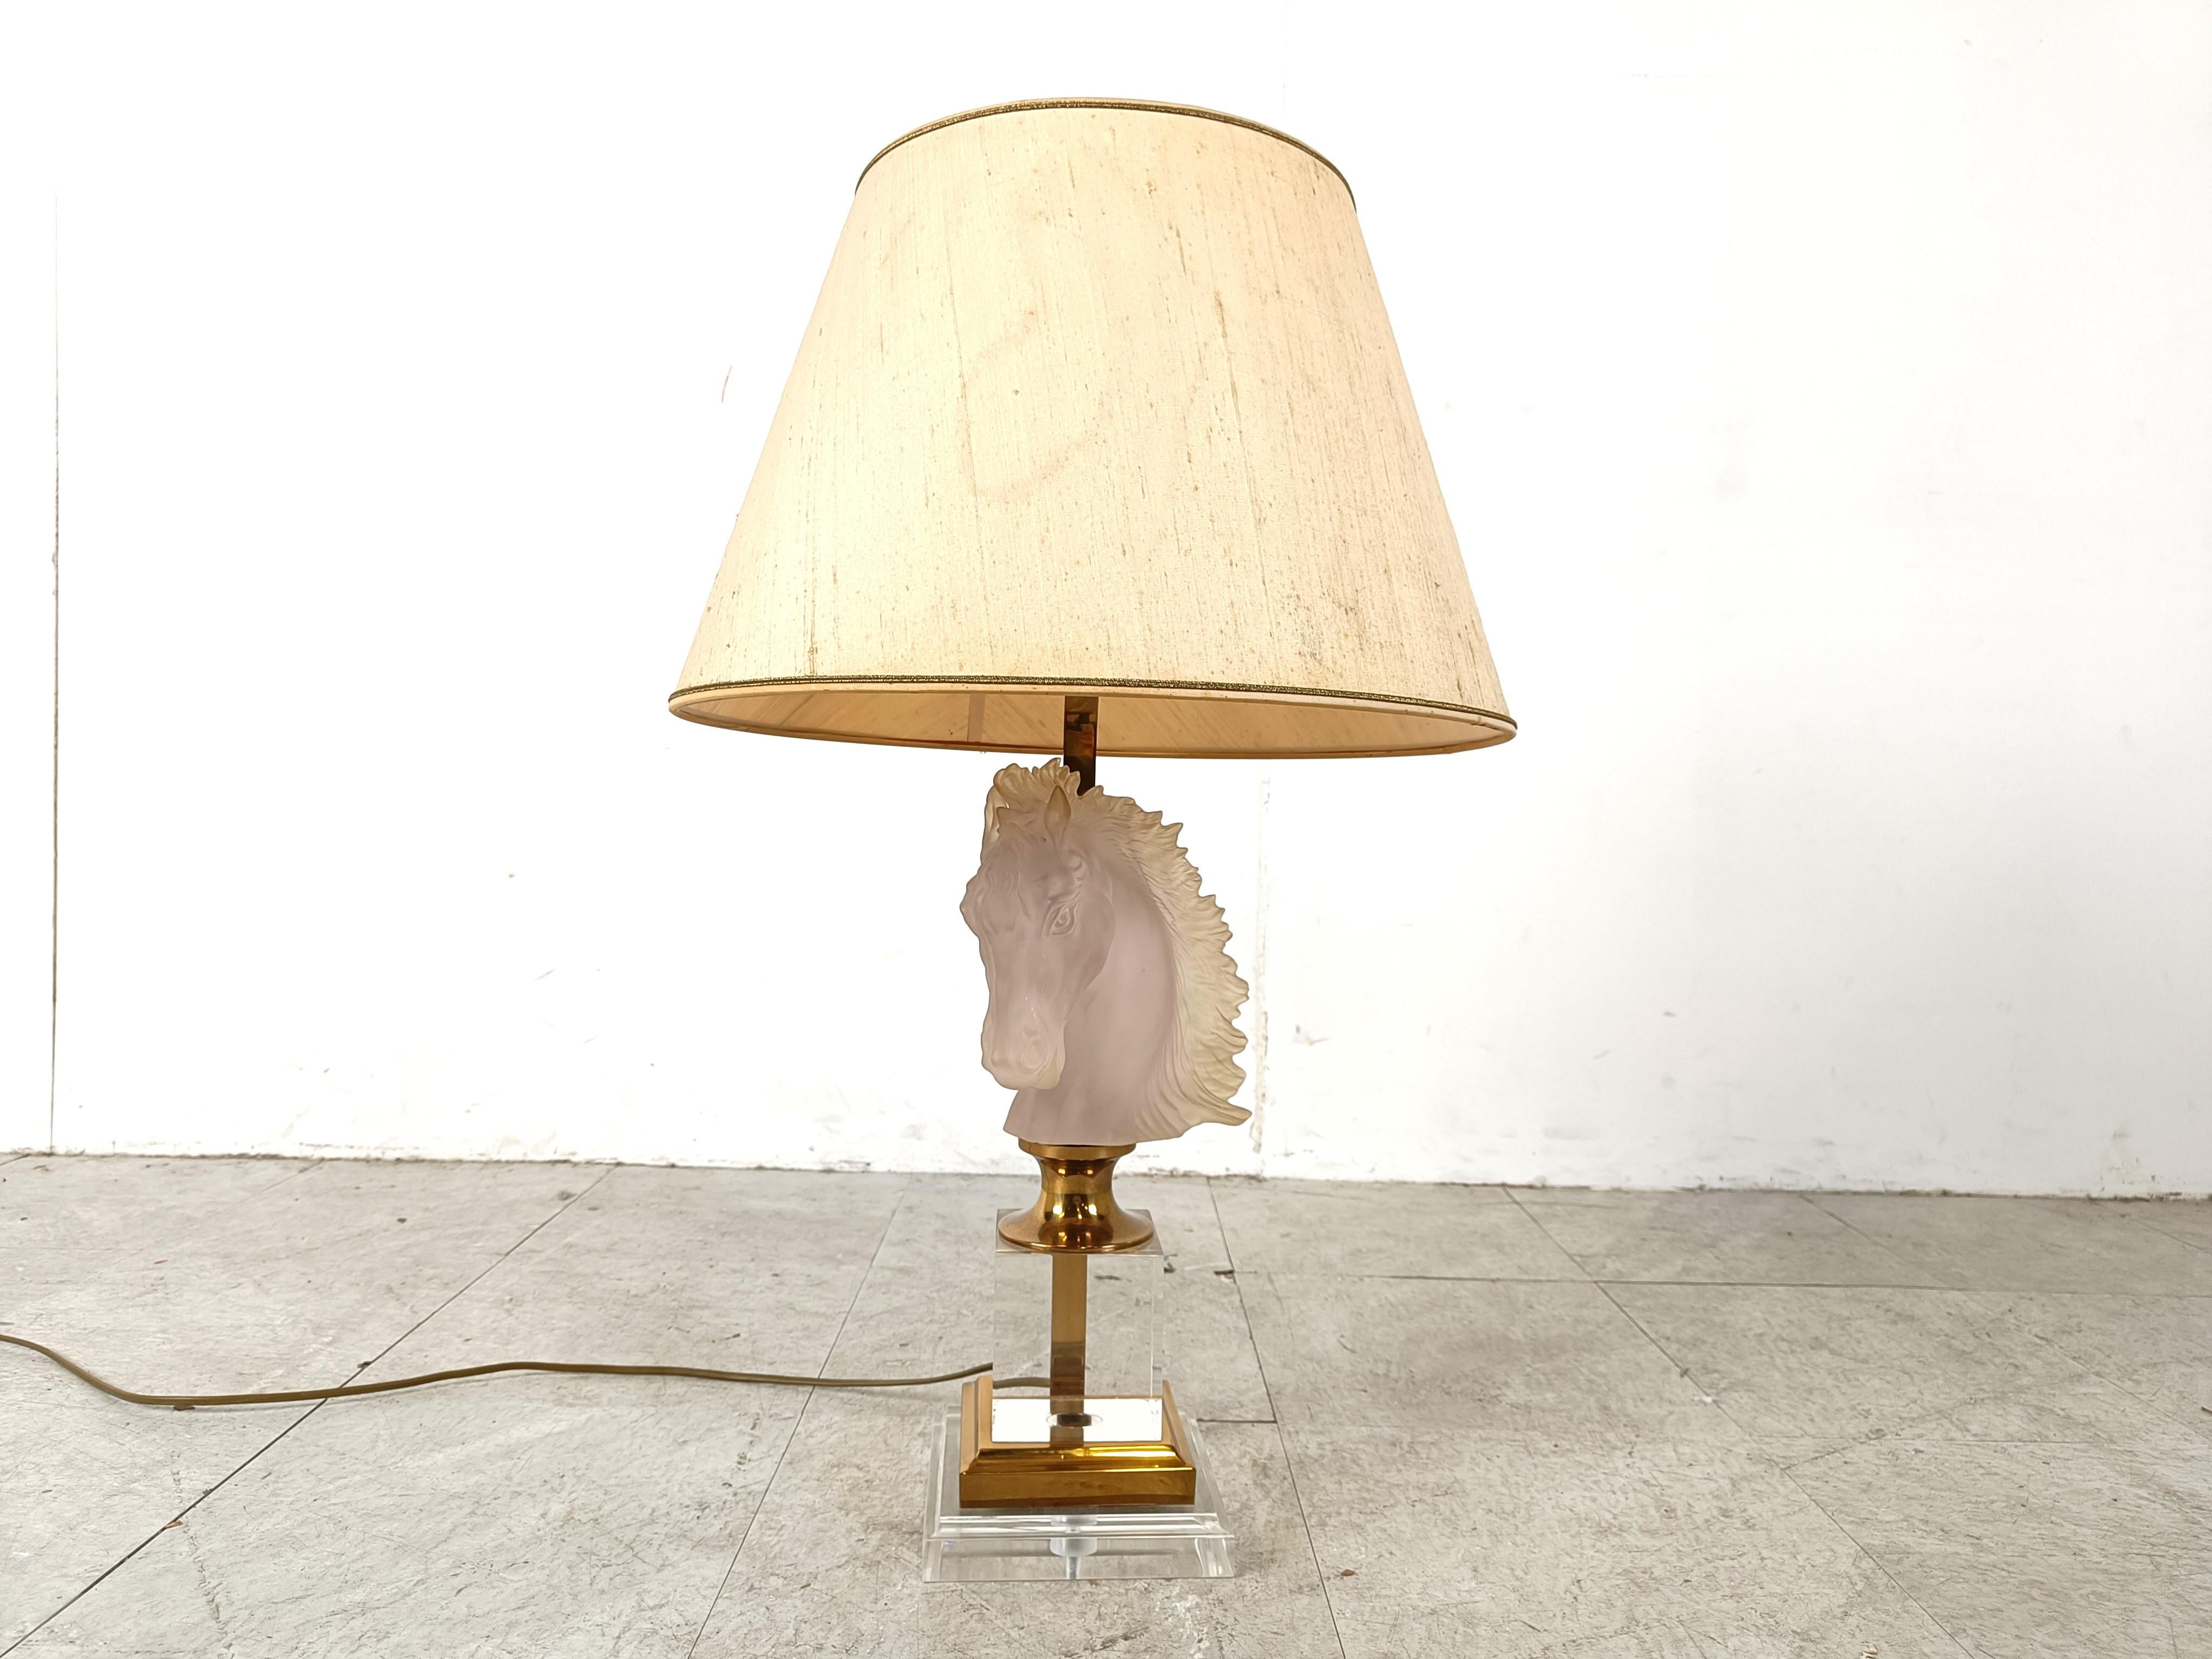 Brass horse head table lamp probably made by Maison Barbier consisting of a brass and lucite base and a glass horse head sculpture.

Stylish table lamp with a luxurious appeal.

The lamp has its original lamp shade

Rewired, tested and ready for